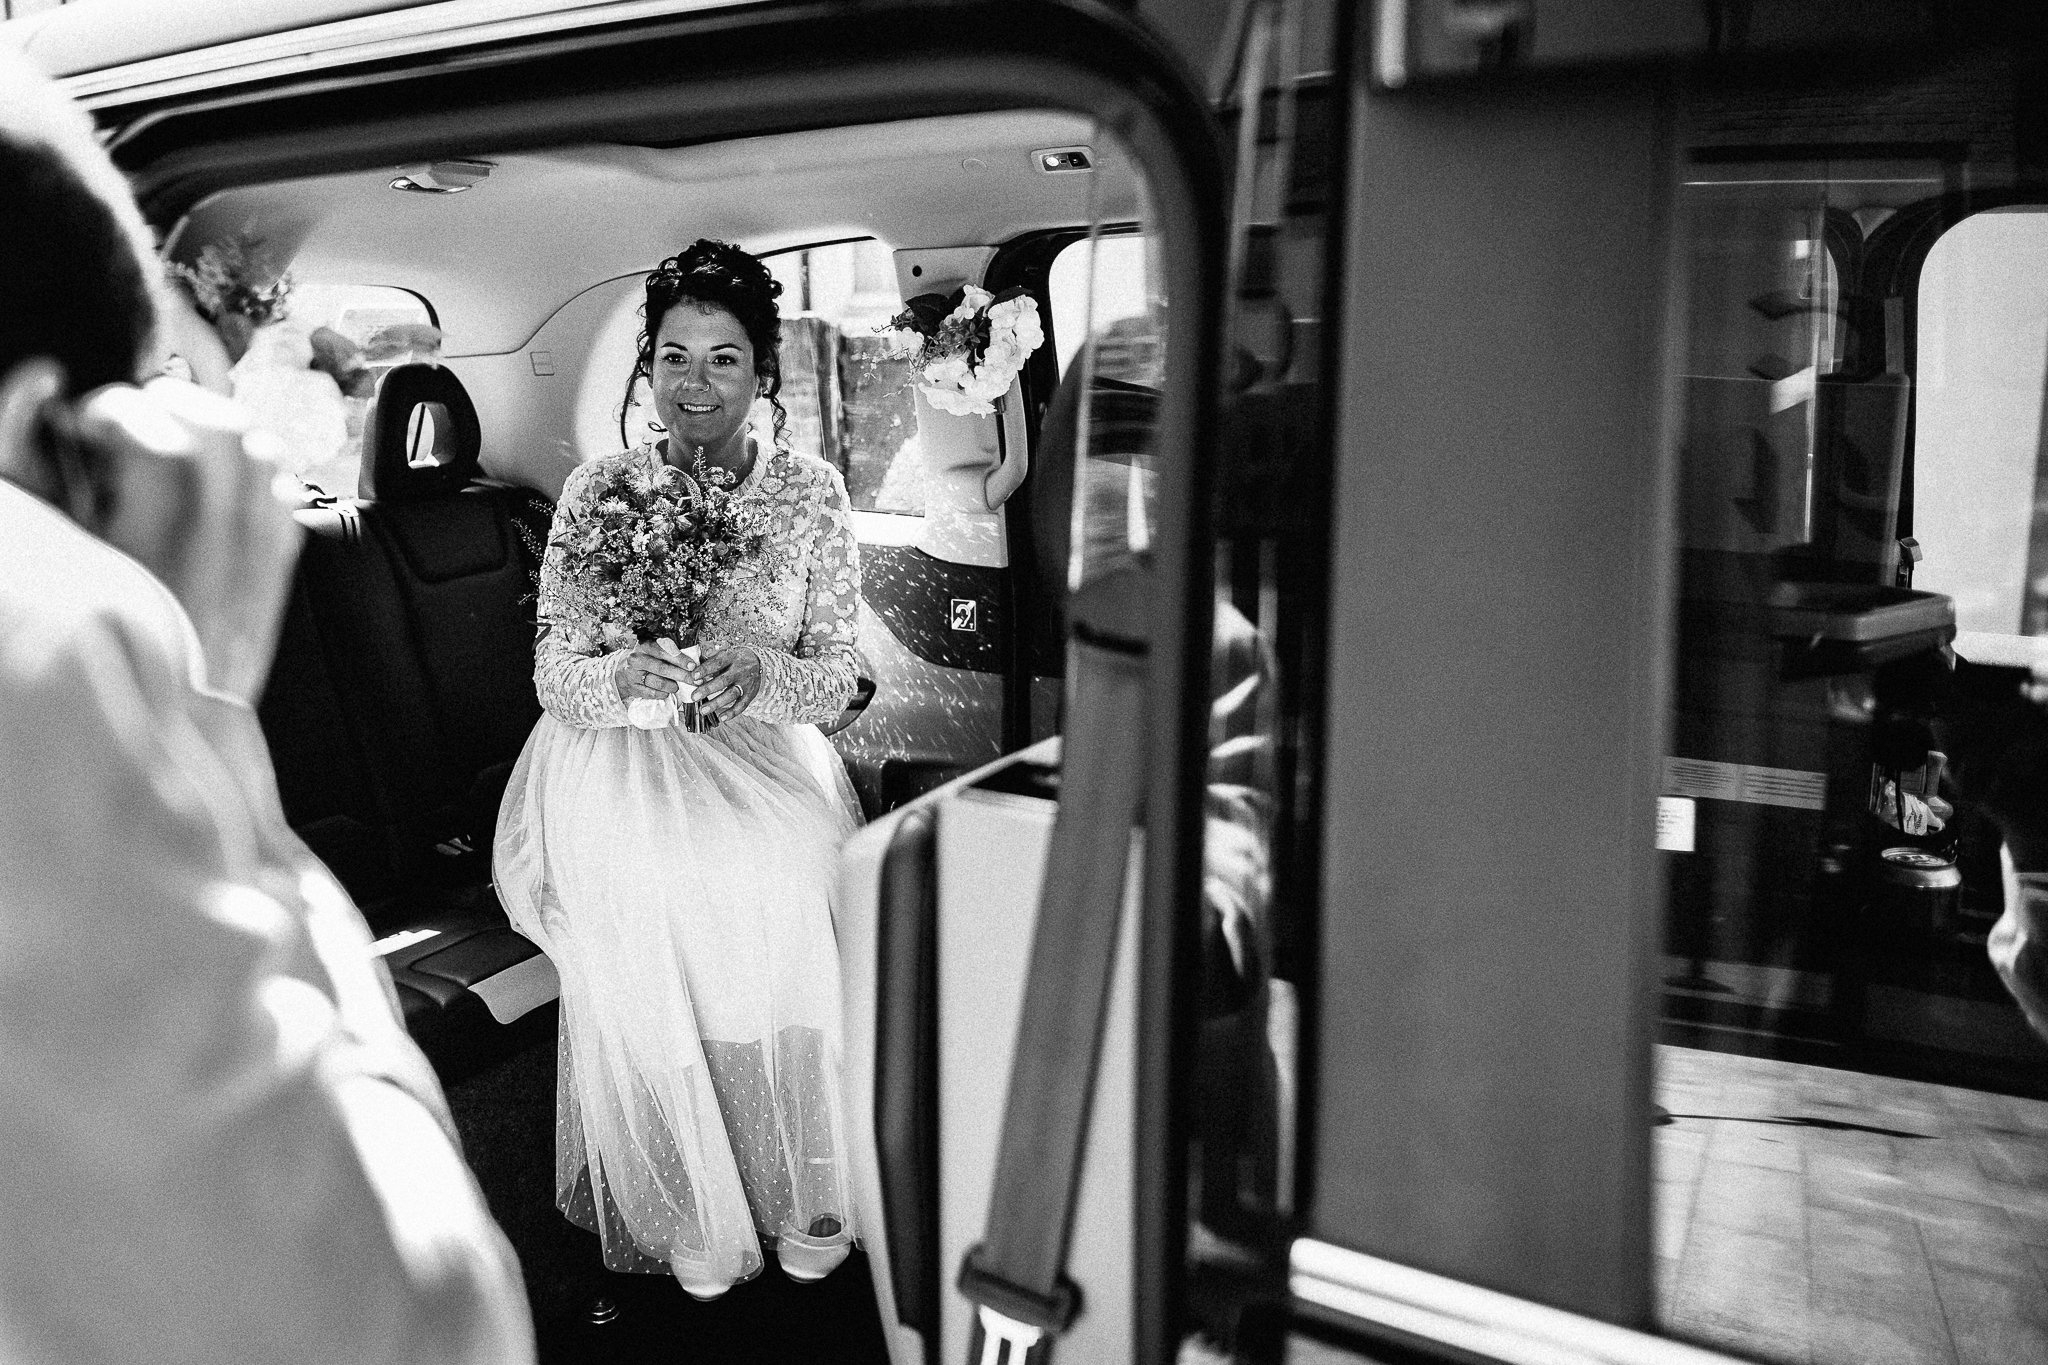  Bride in a black cab after their wedding at Hammersmith Register Office 